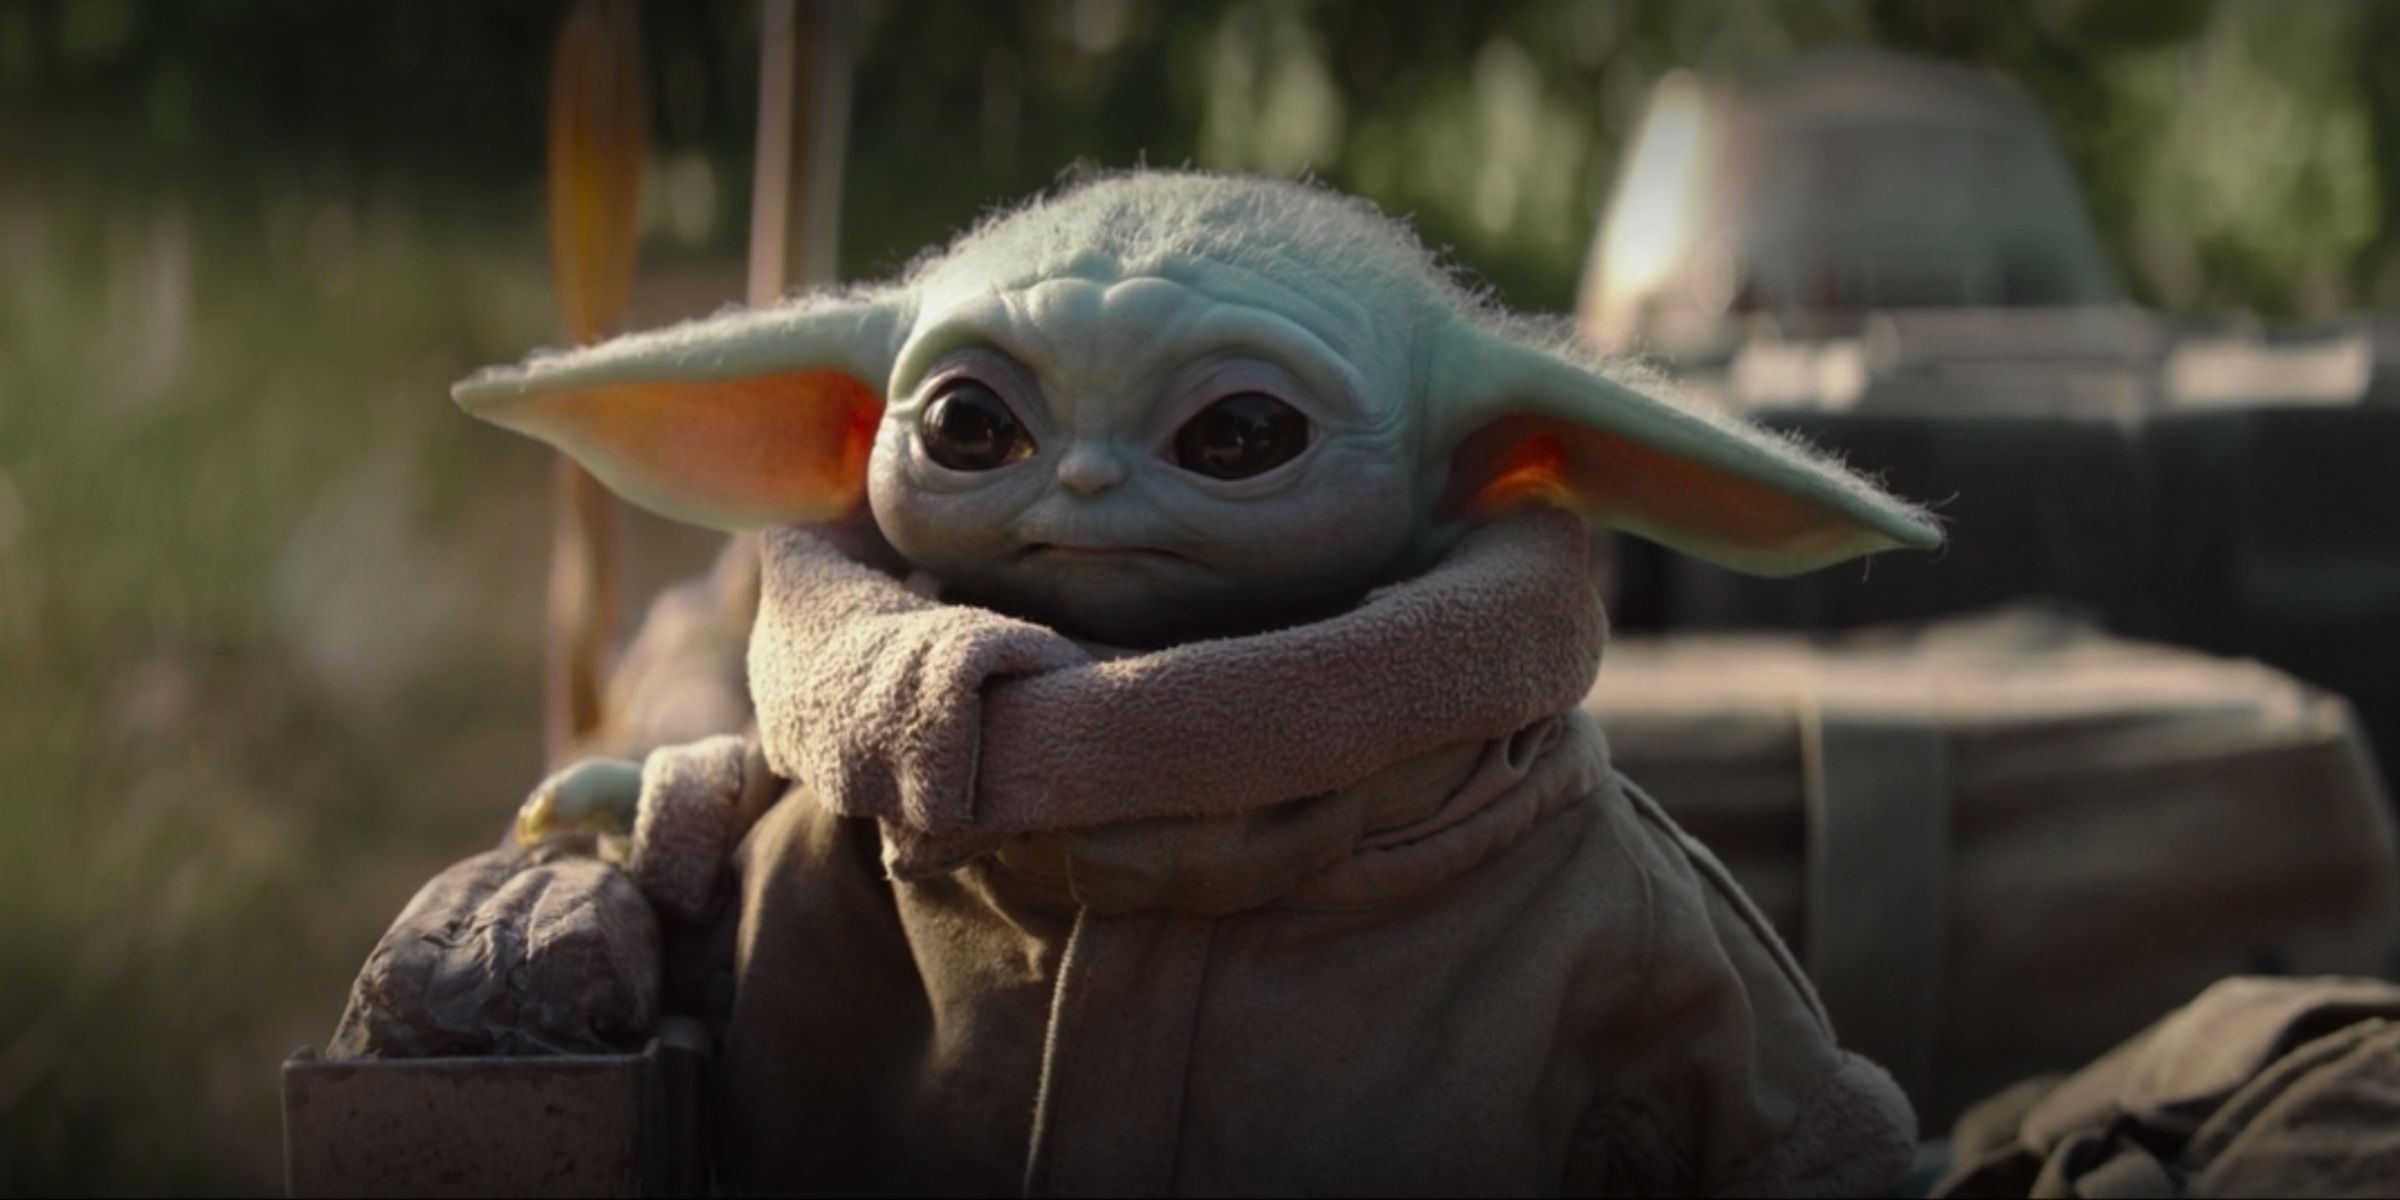 Mandalorian: Baby Yoda Featured In TIME's People of the Year Issue